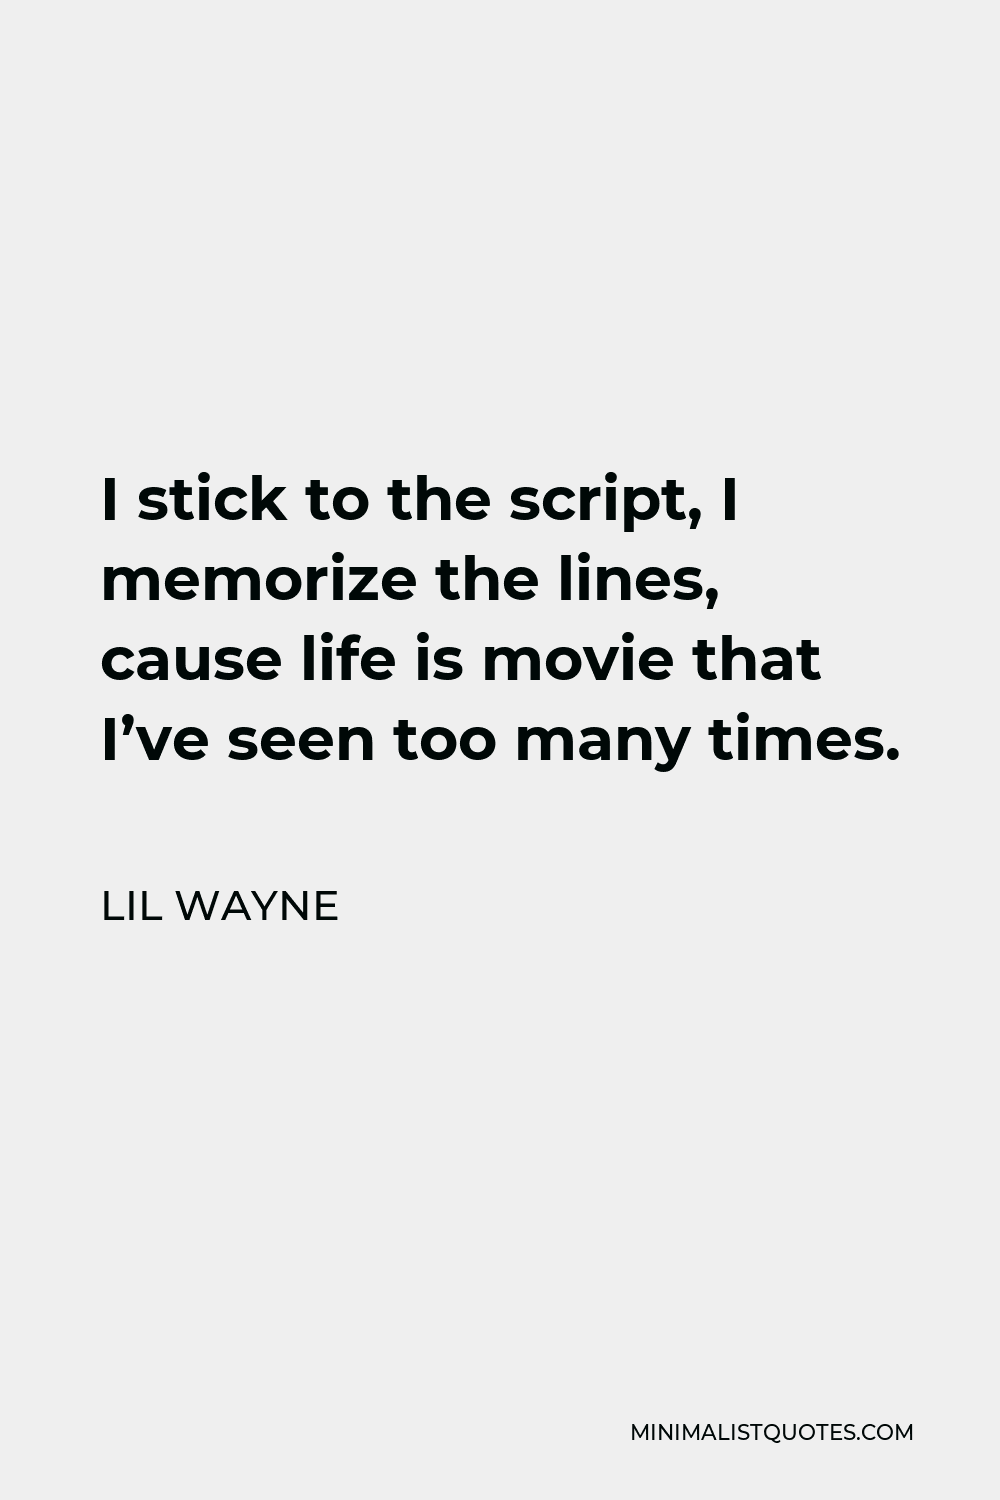 Lil Wayne Quote - I stick to the script, I memorize the lines, cause life is movie that I’ve seen too many times.